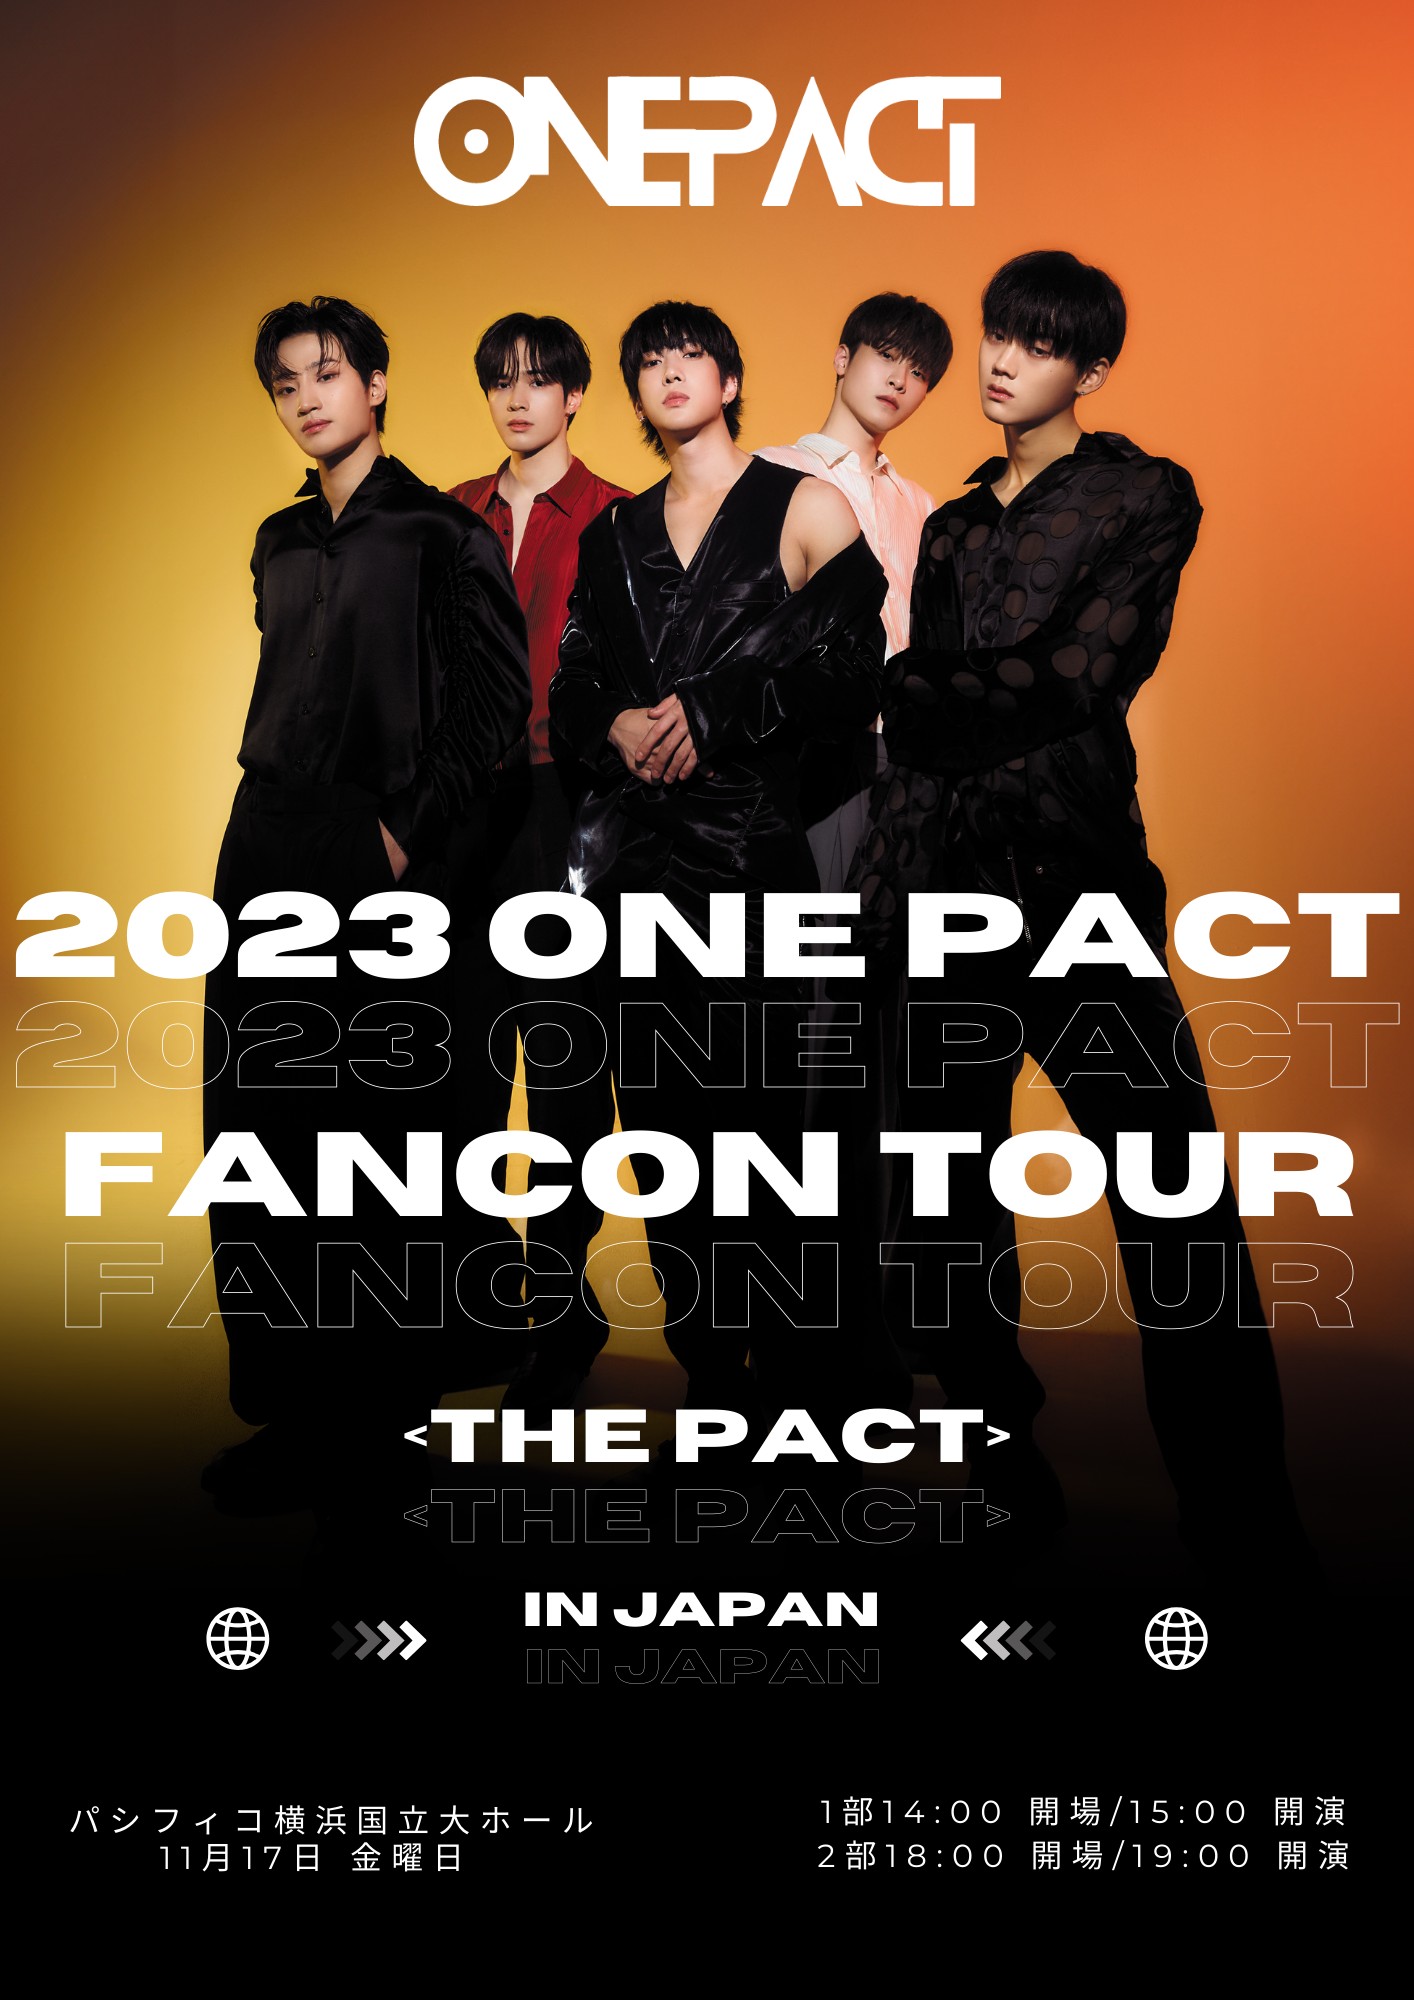 2023 ONE PACT FANCON TOUR ＜THE PACT＞ IN JAPAN